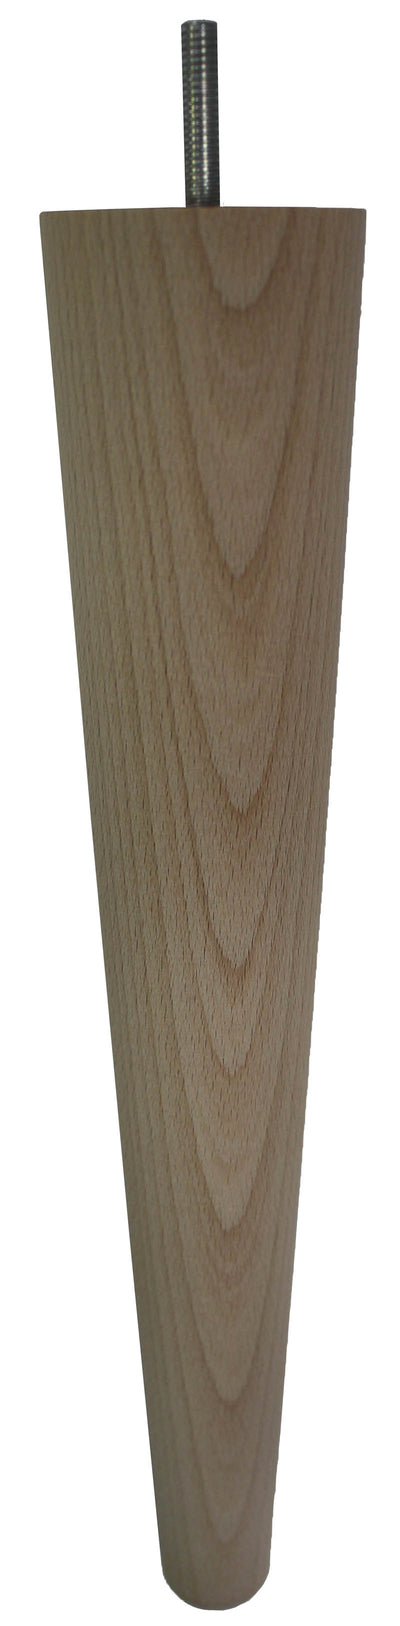 Angelina Tall Wooden Furniture Legs